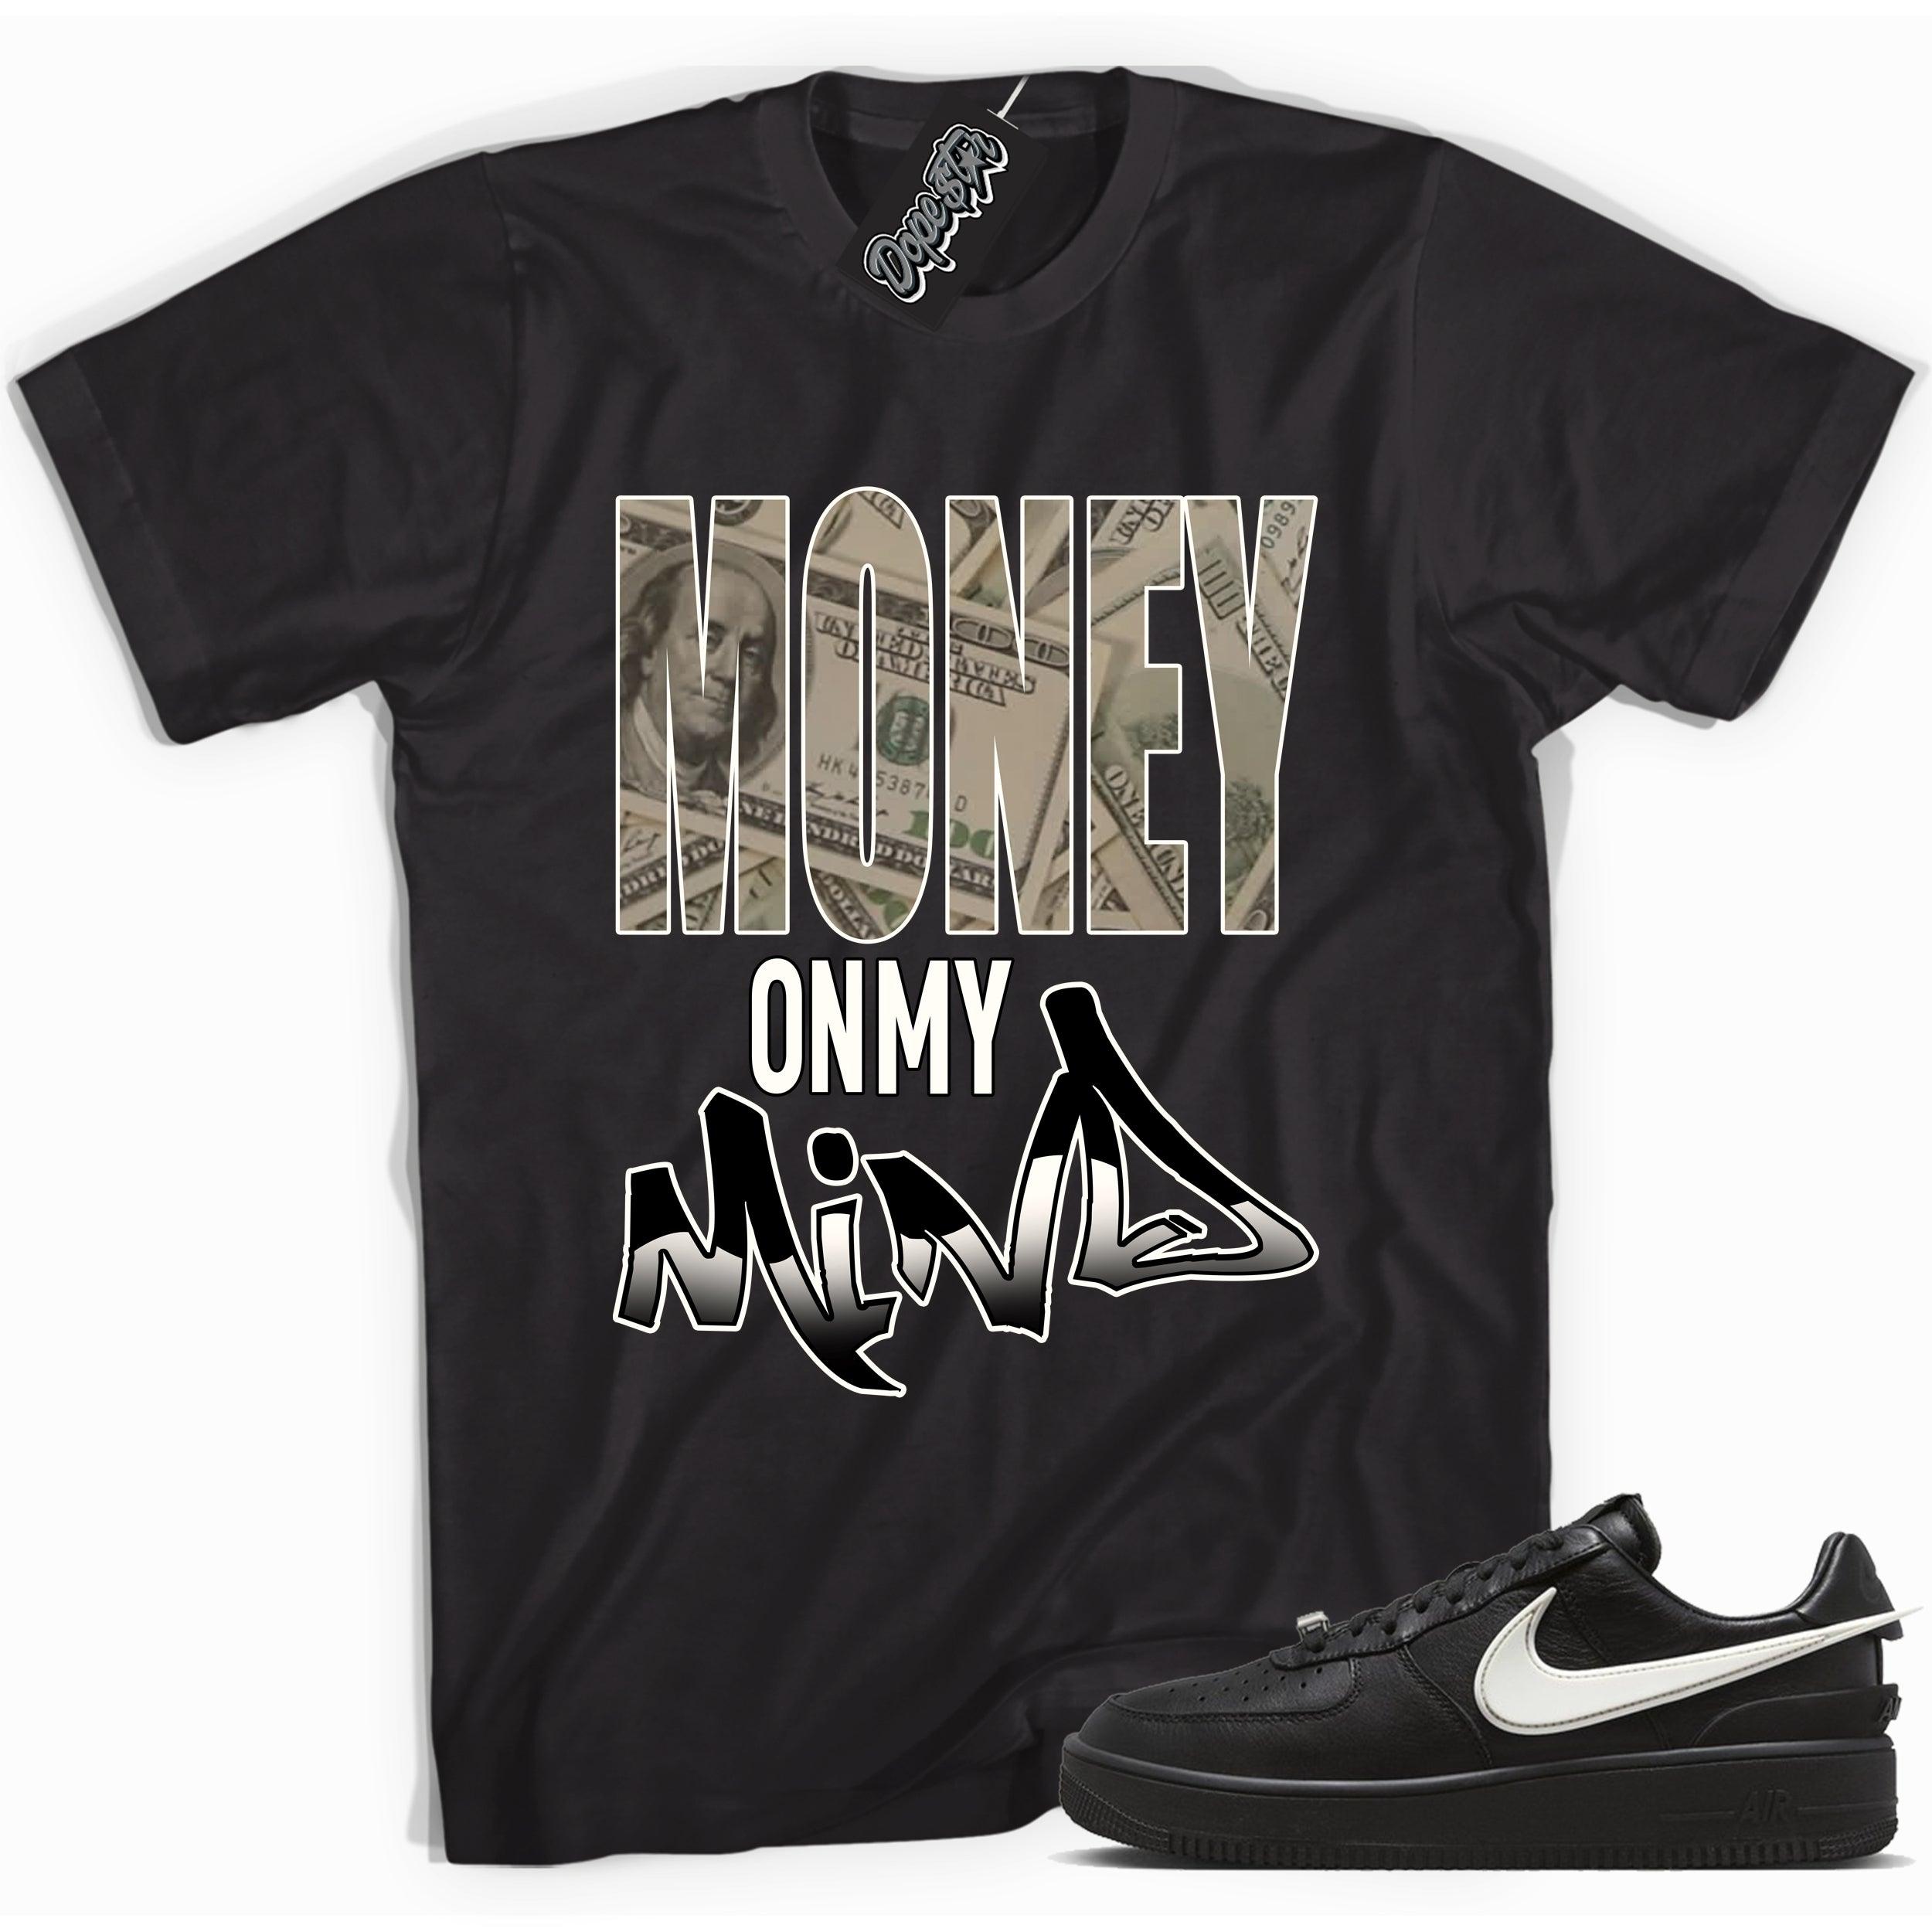 Cool black graphic tee with 'money on my mind' print, that perfectly matches Nike Air Force 1 Low Ambush Phantom Black sneakers